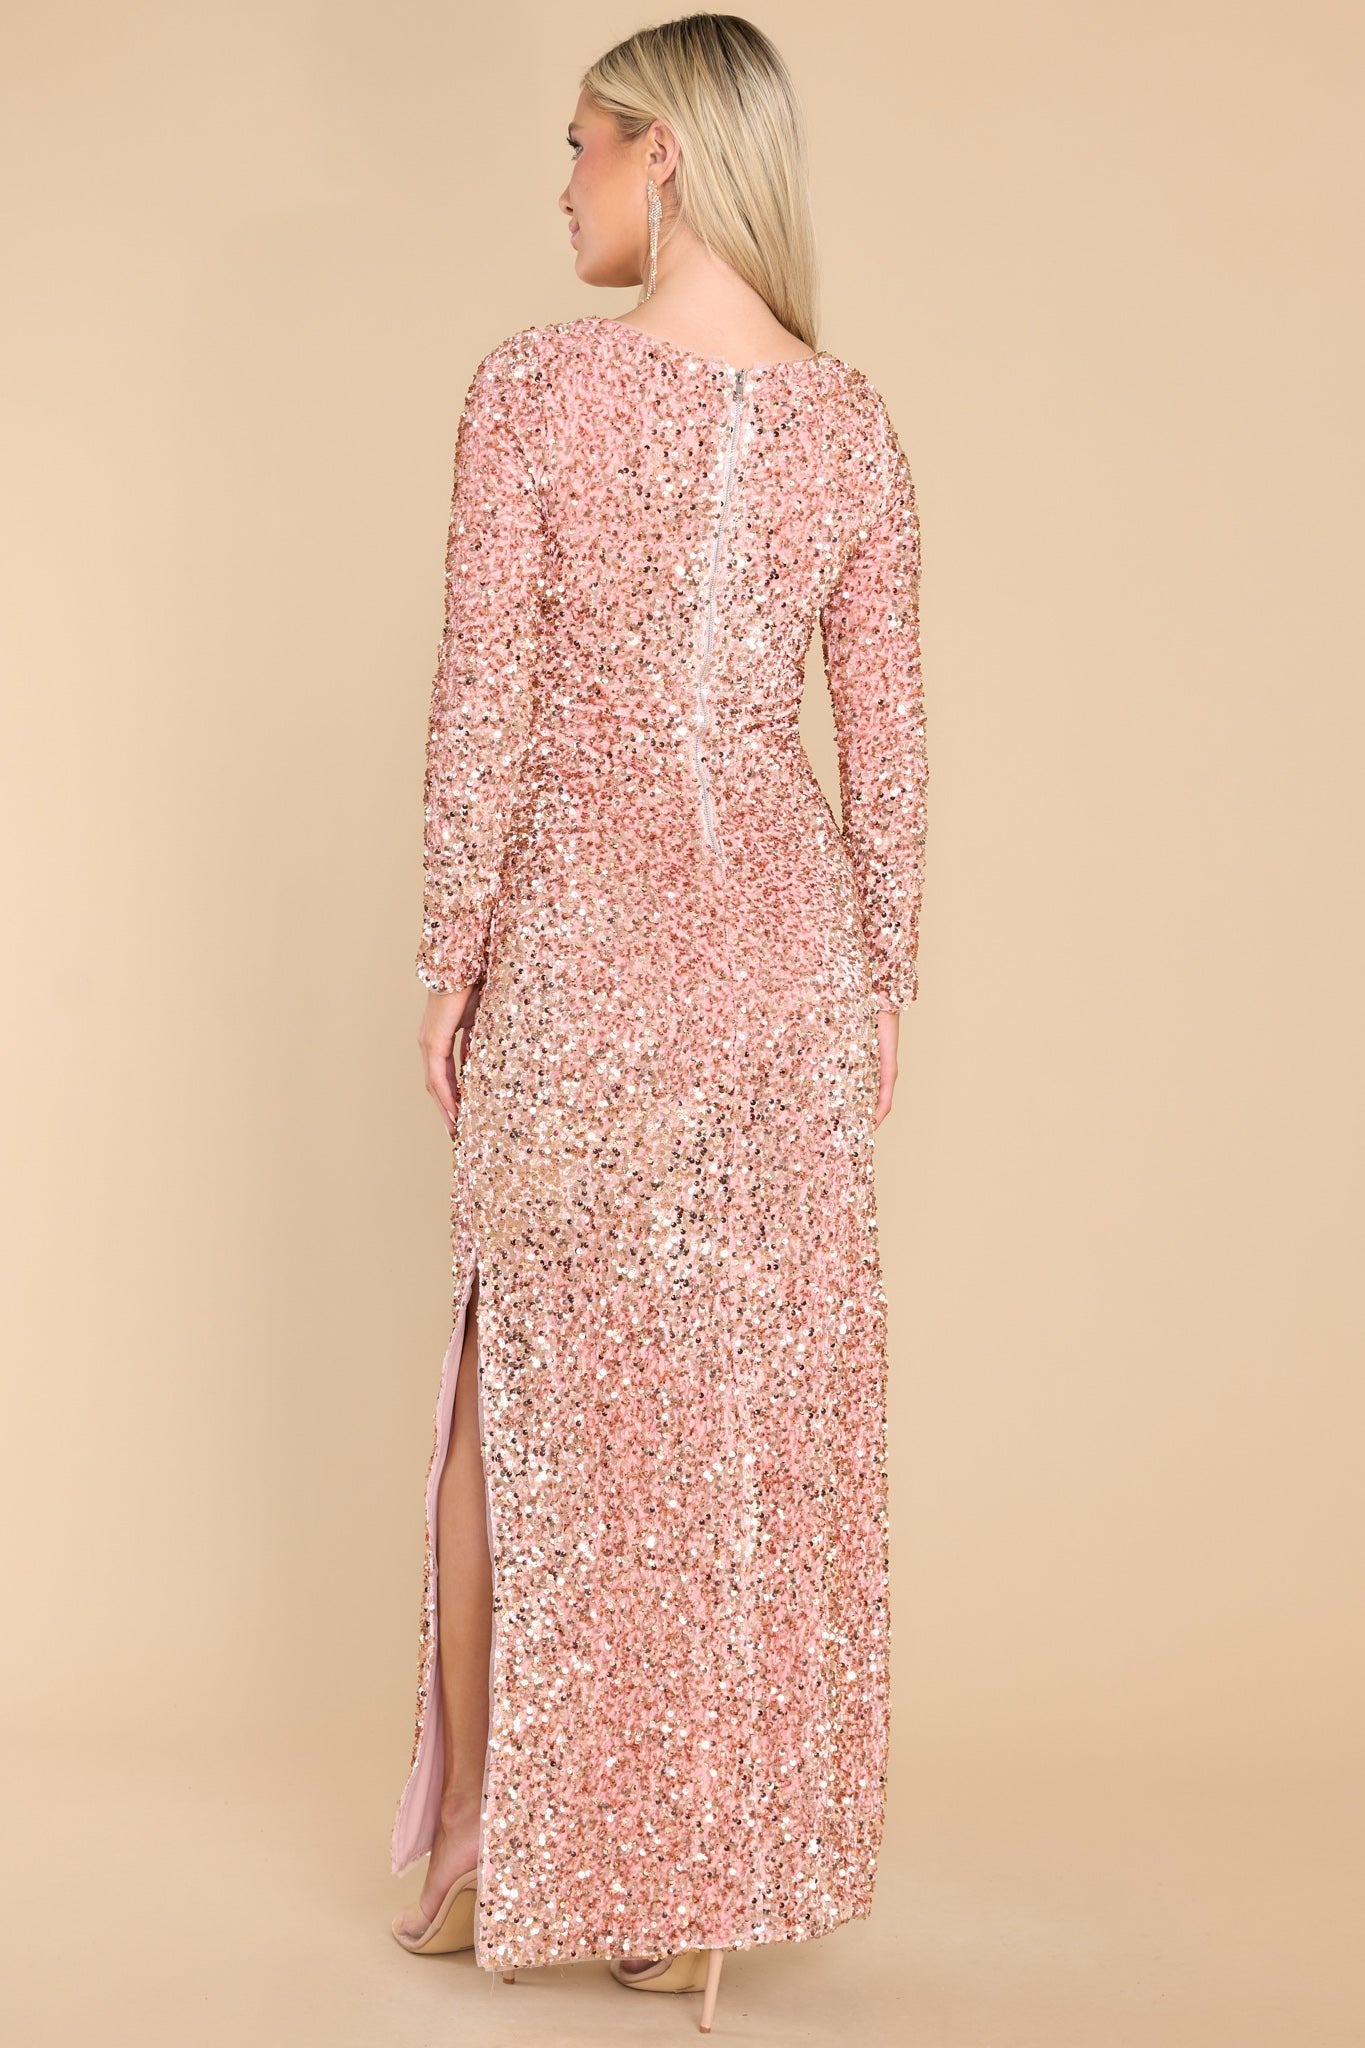 Hold Your Crown Rose Gold Sequin Maxi Dress - Red Dress